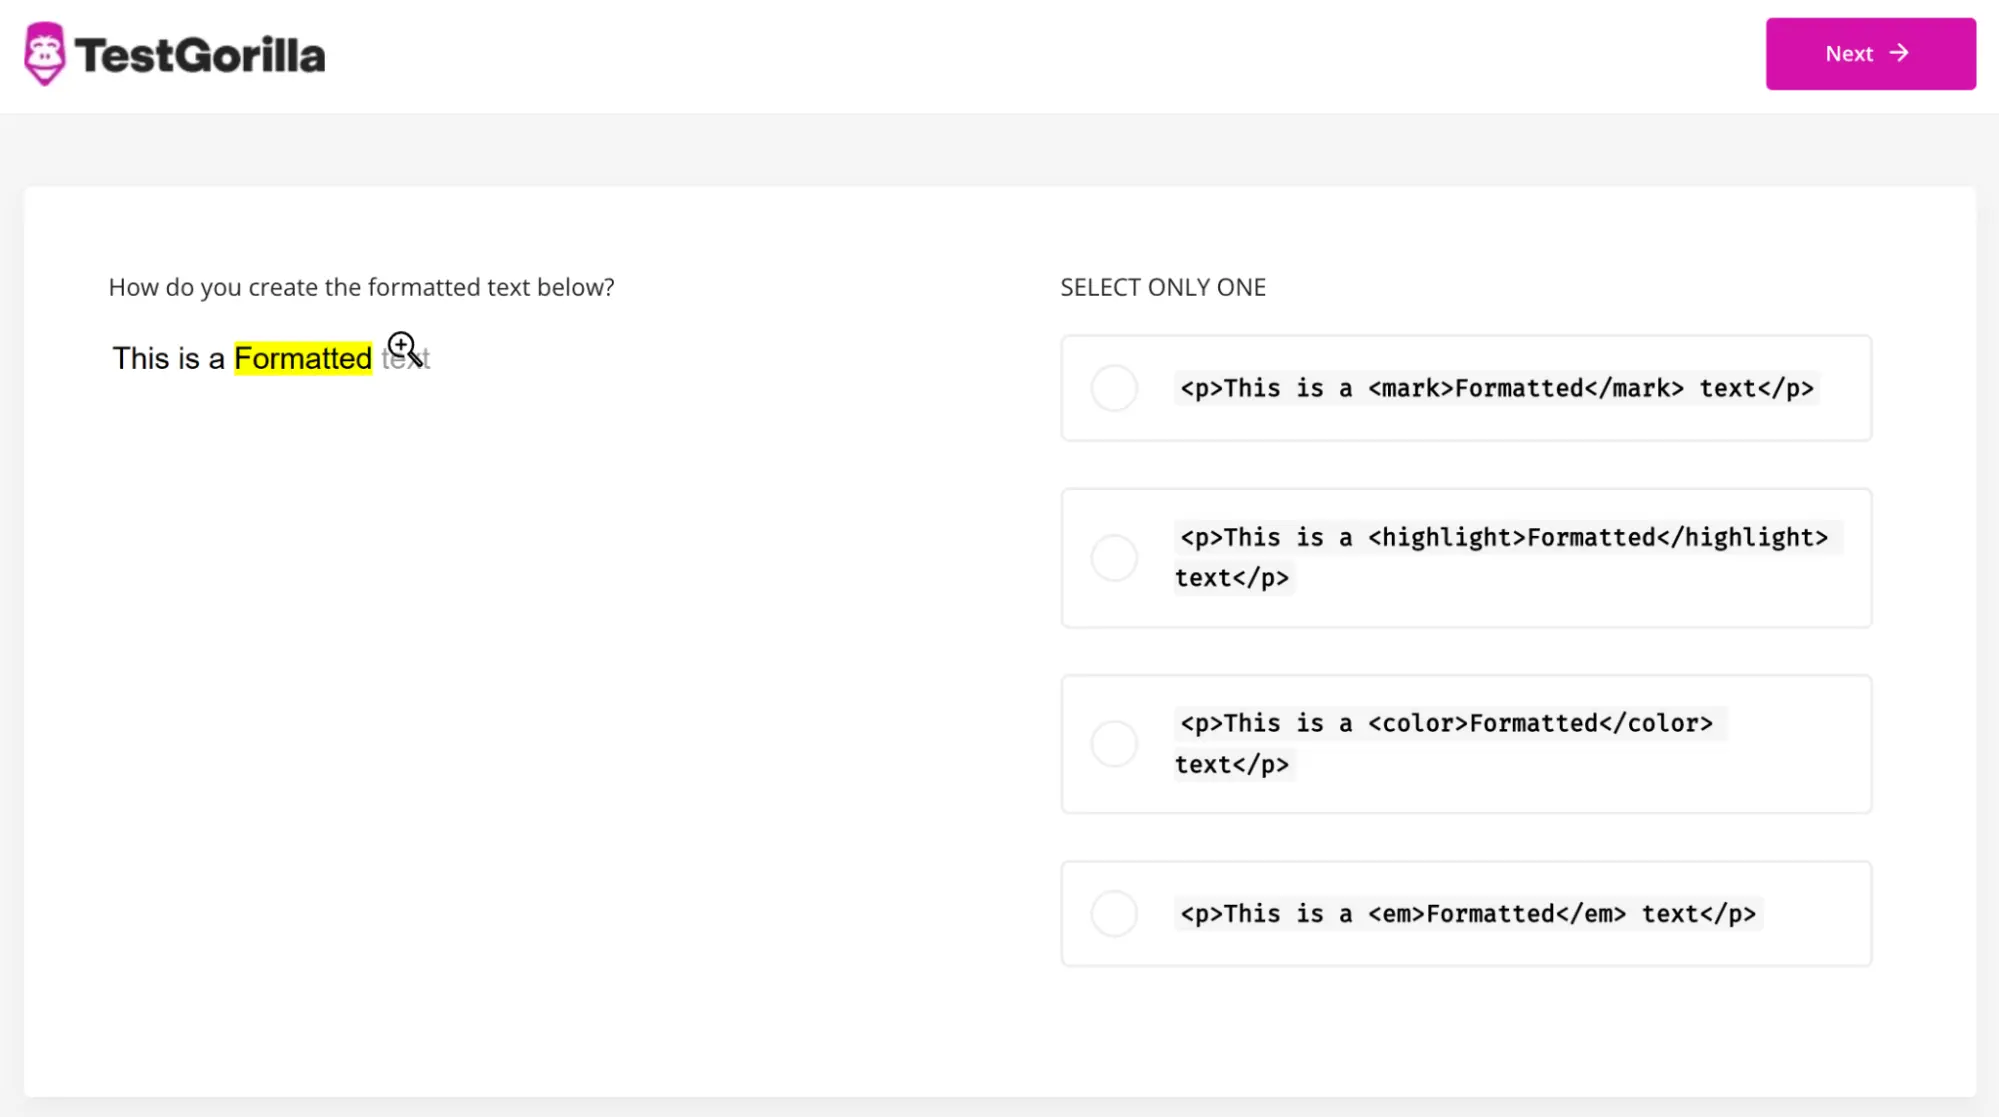 A sample question from TestGorilla's HTML5 test